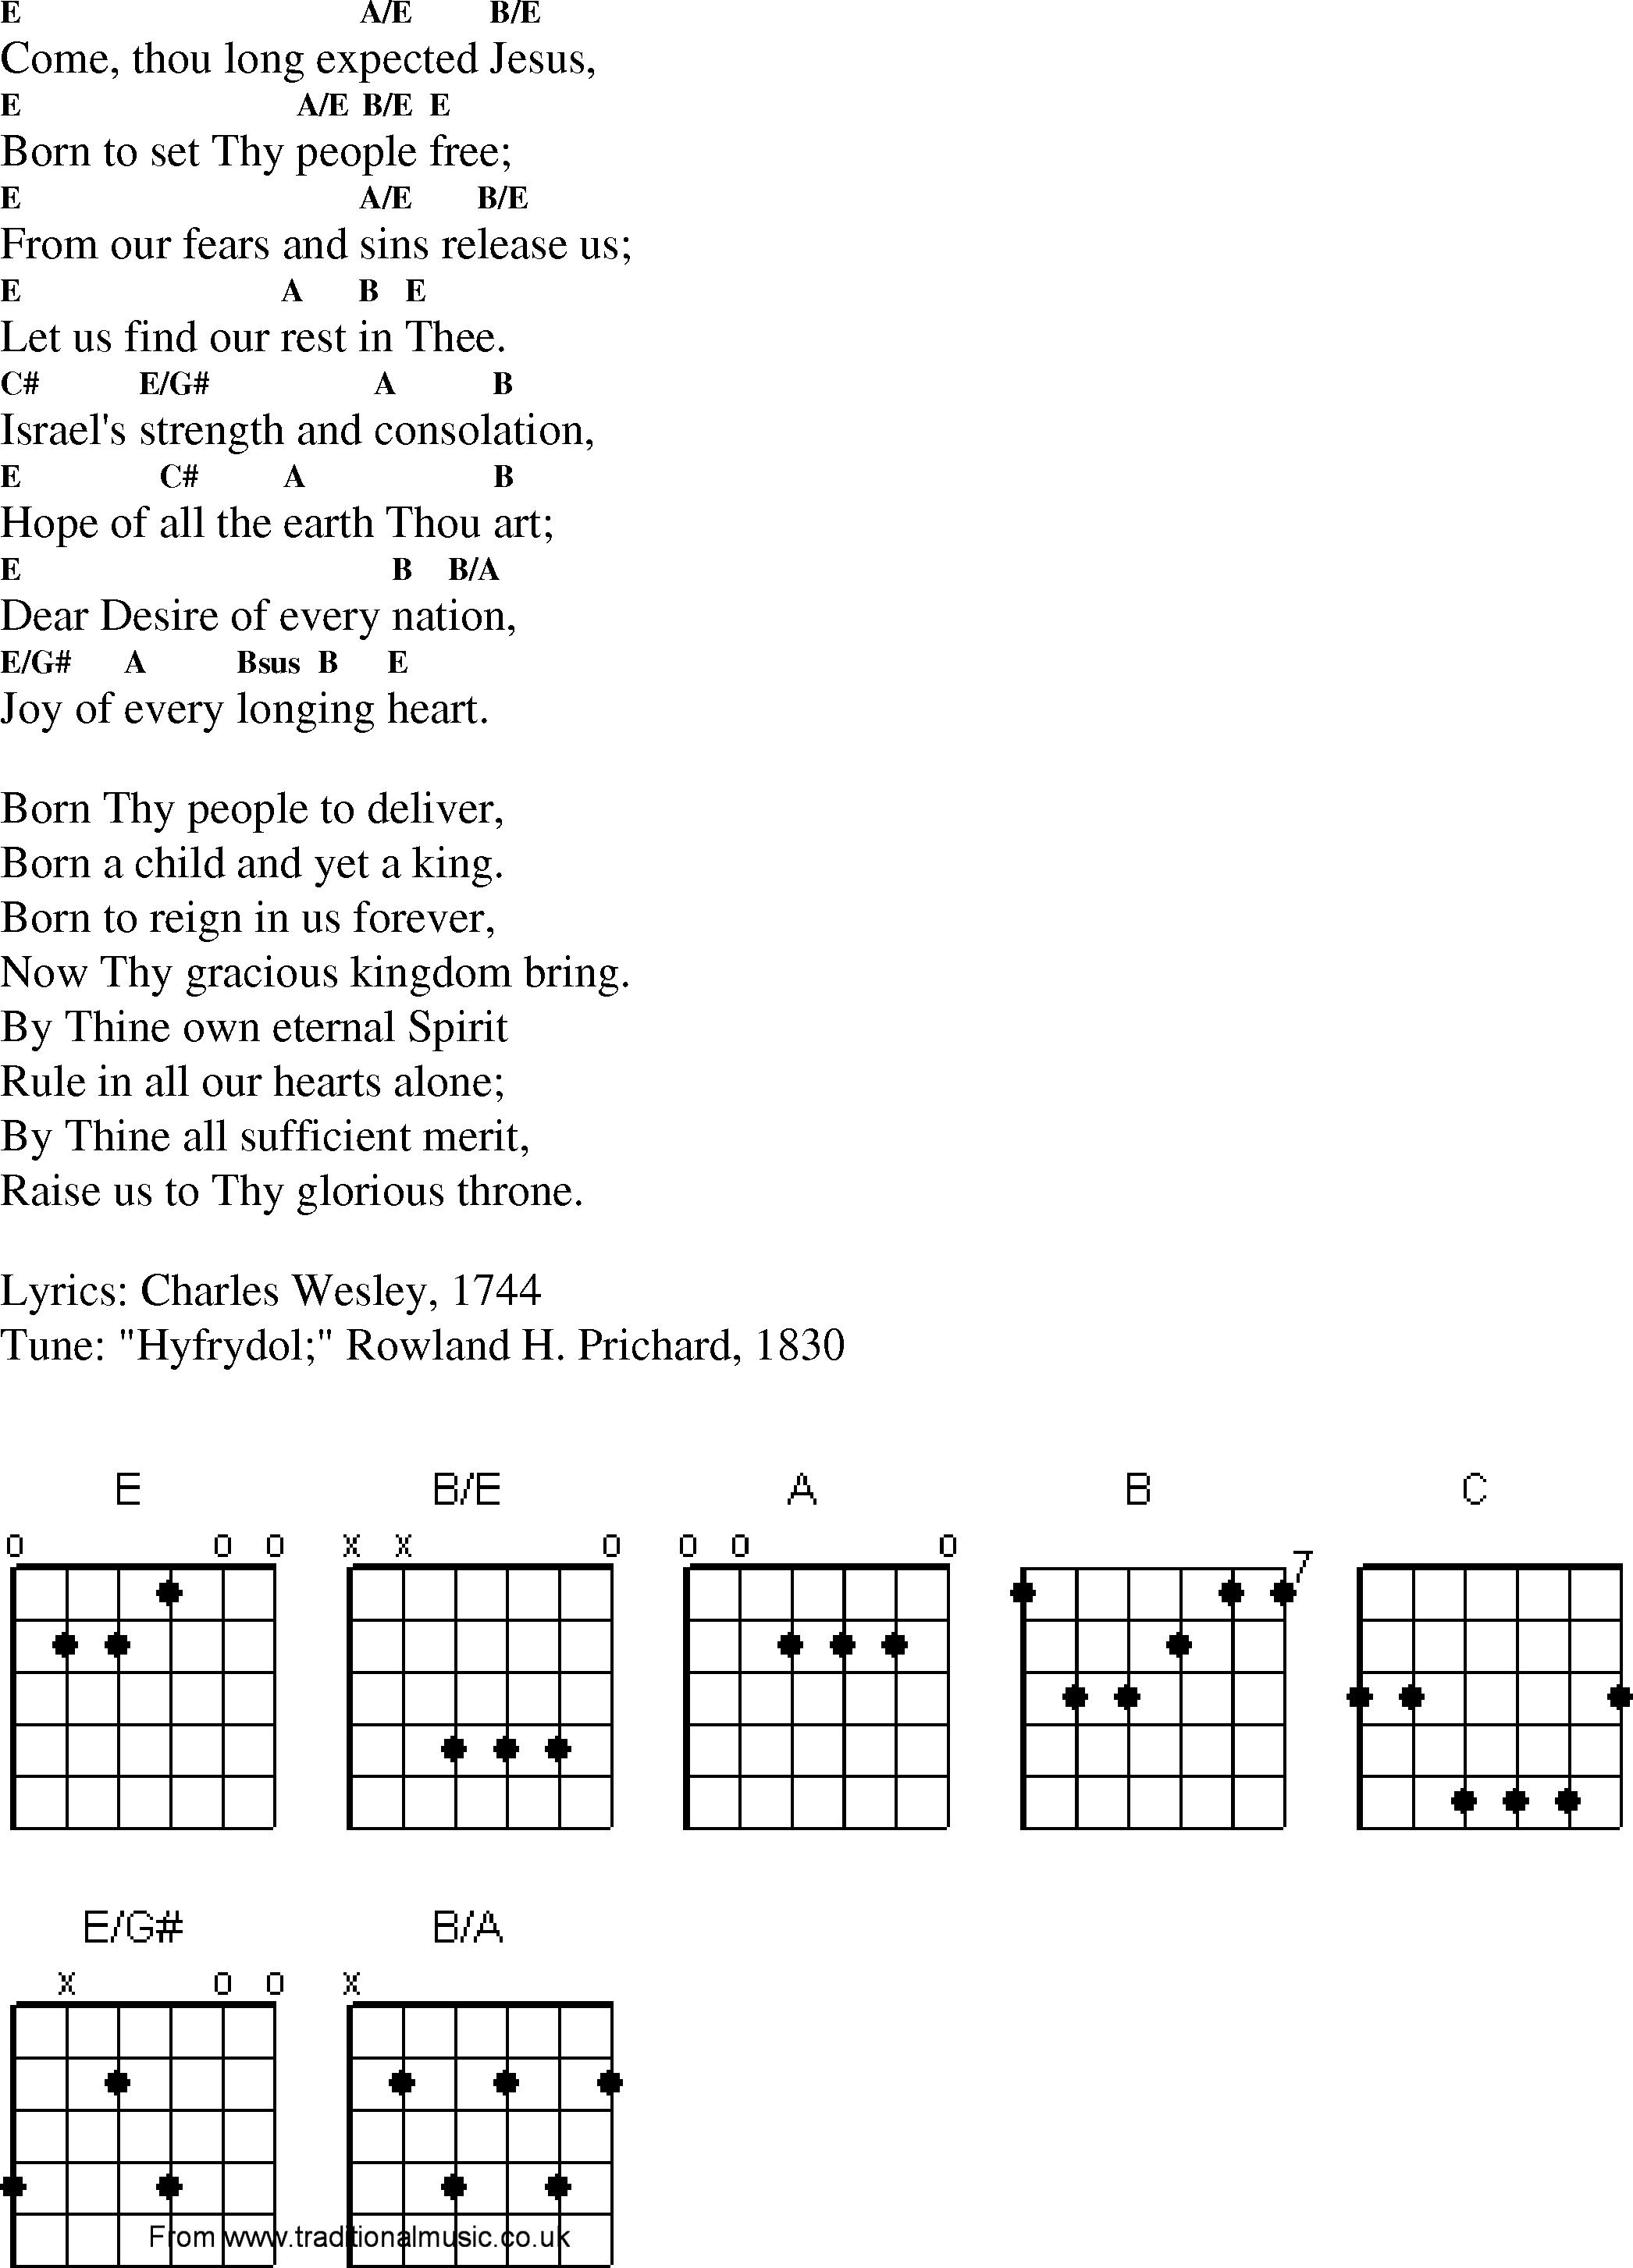 Gospel Song: come_thou_long_expected_jesus, lyrics and chords.